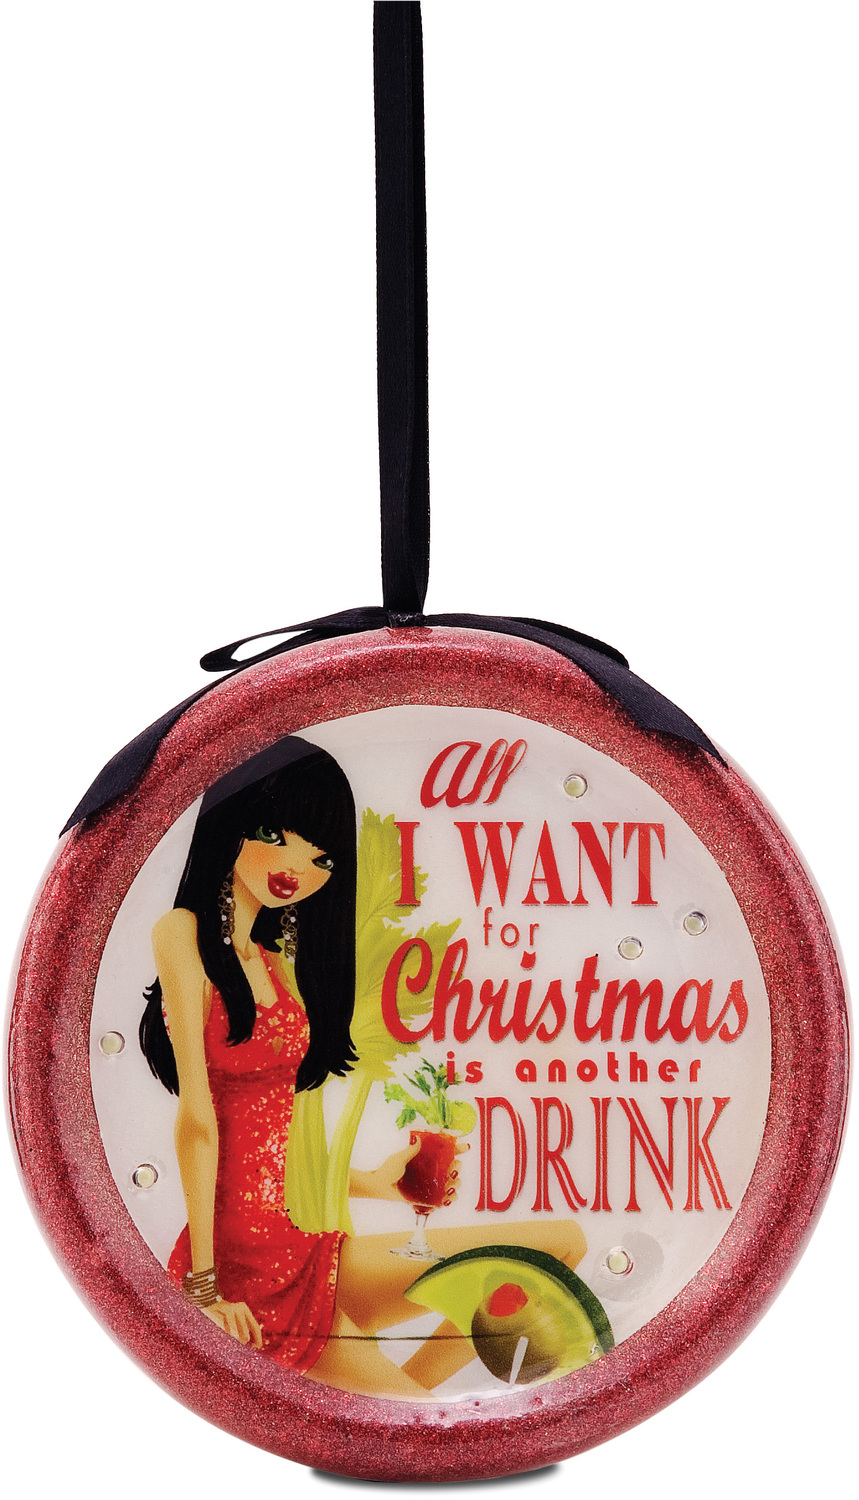 All I want for Christmas is another Drink by Hiccup - All I want for Christmas is another Drink - 120mm Blinking Ornament